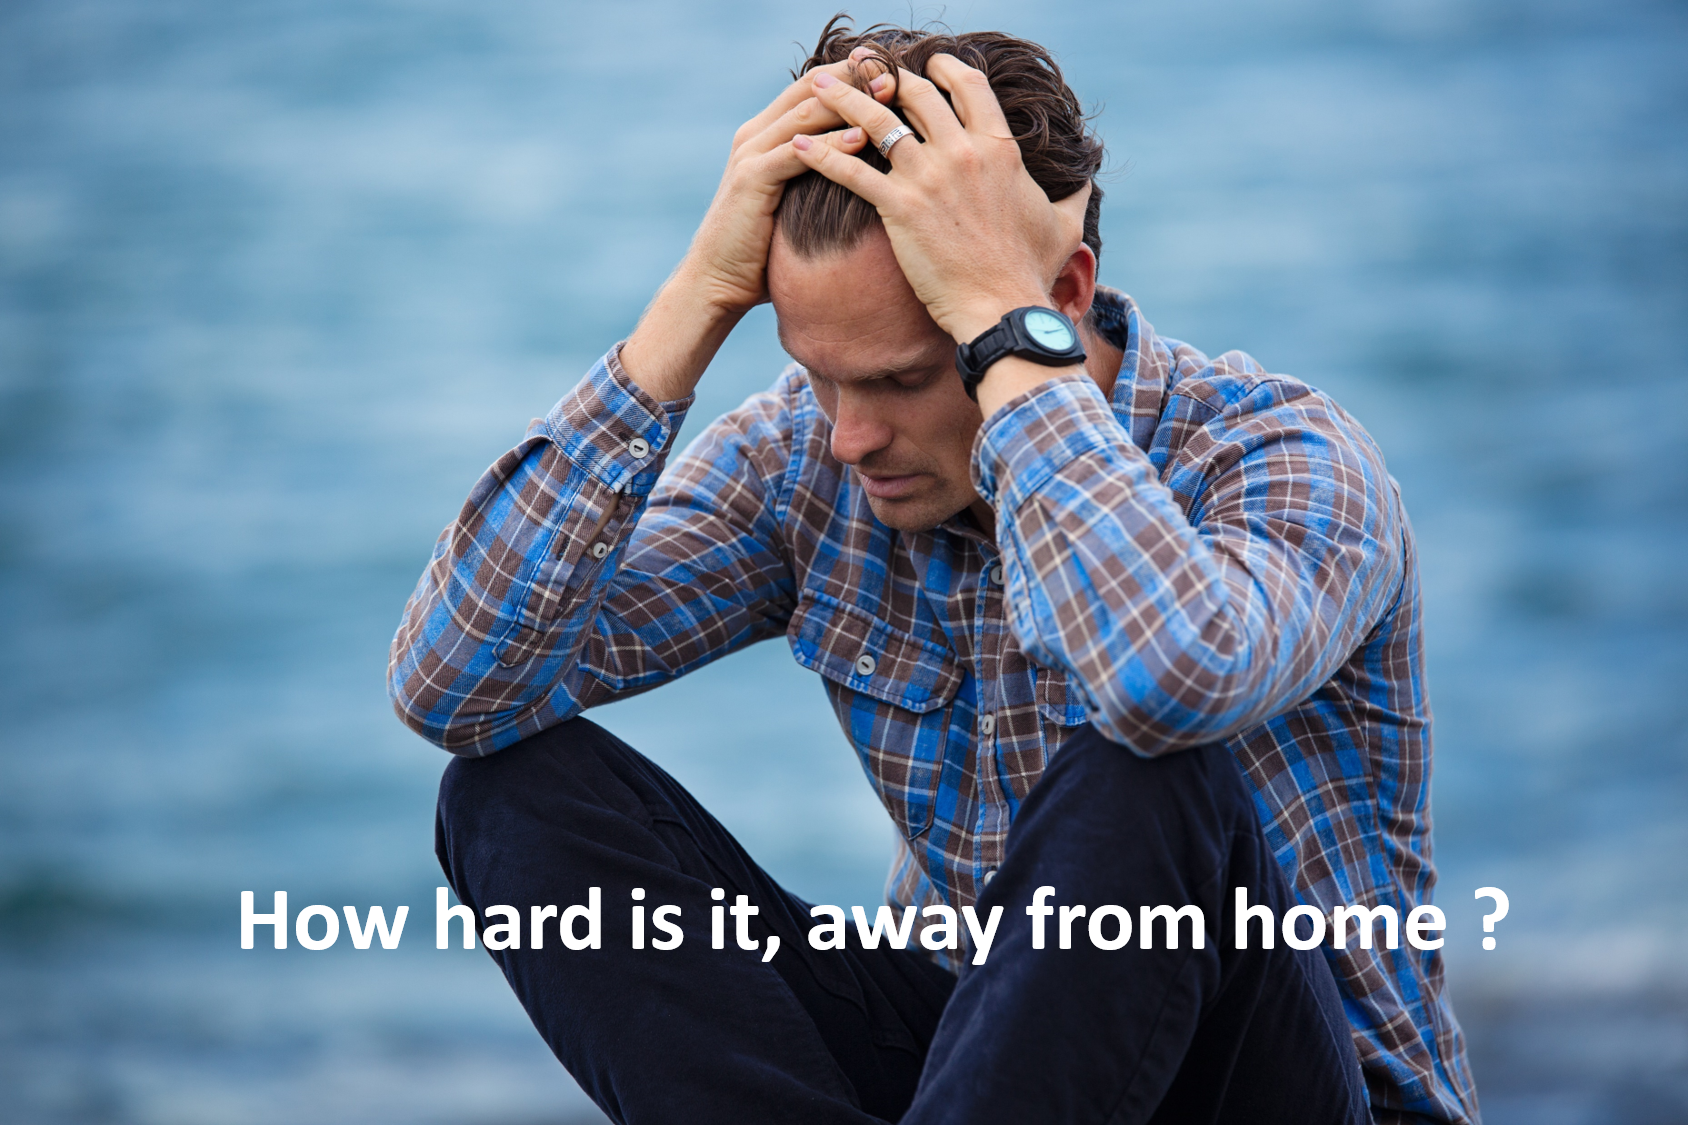 Mental challenges: How hard is it away from home?